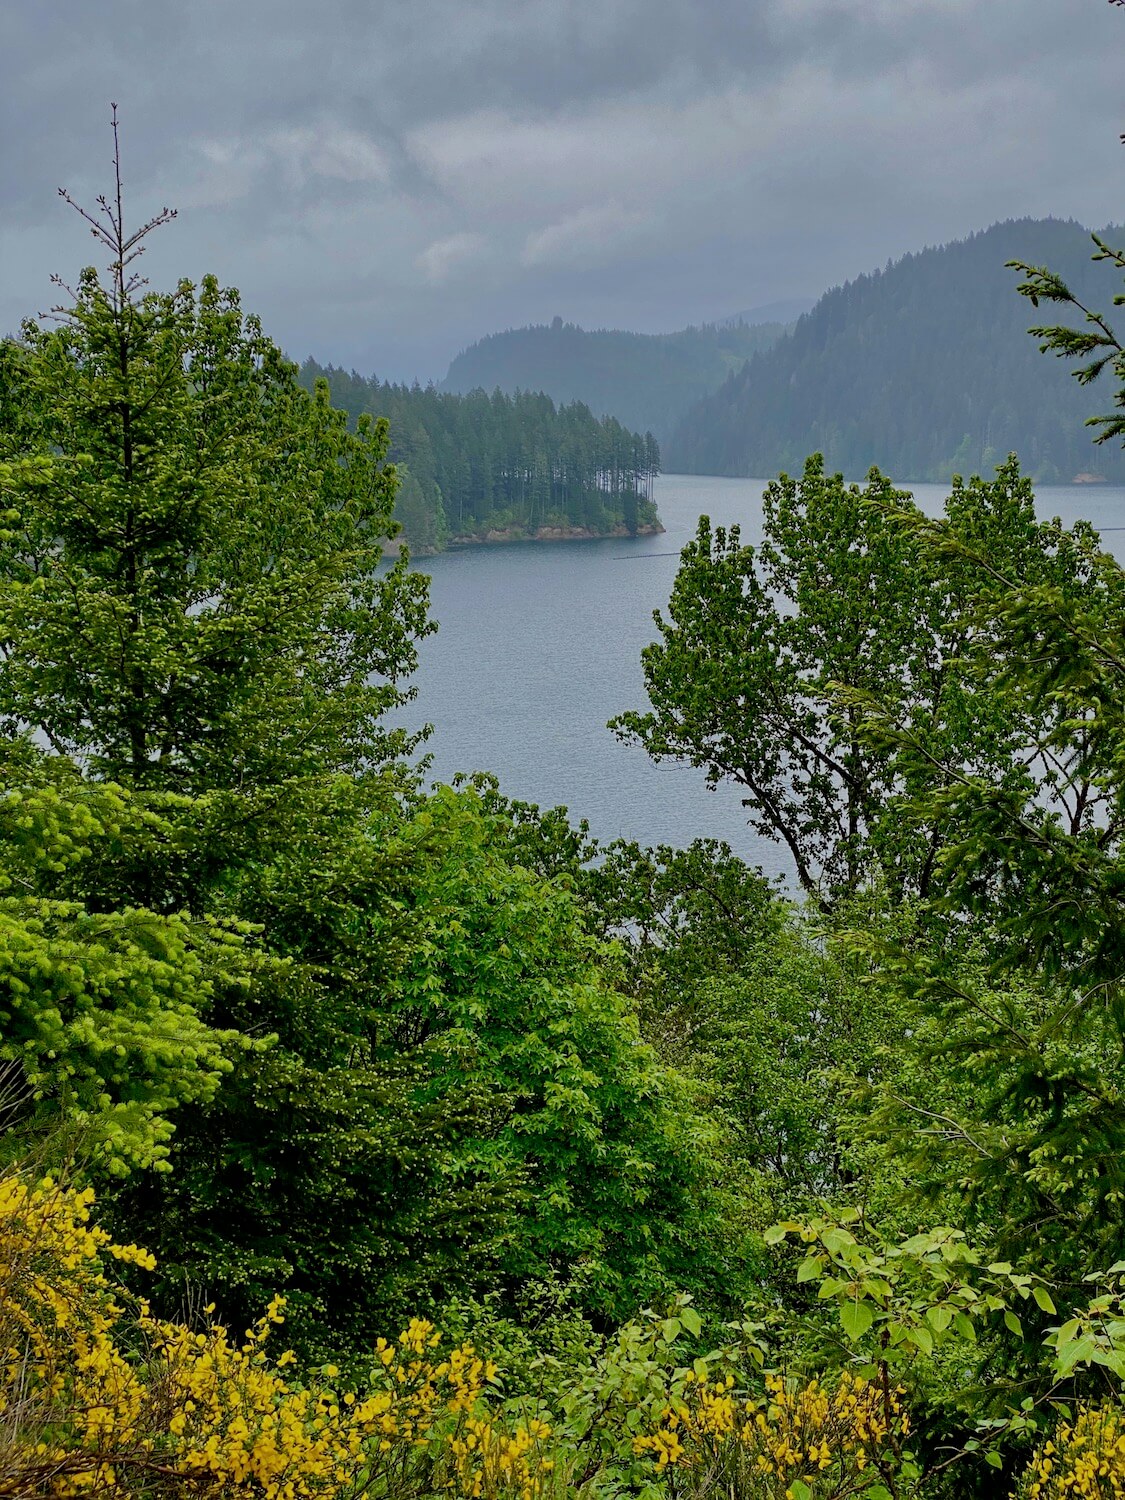 The lakes along the Lewis River, near Cougar, Washginton are beautiful any time of year with a sense of mystical fog and open bands of green fir trees.  